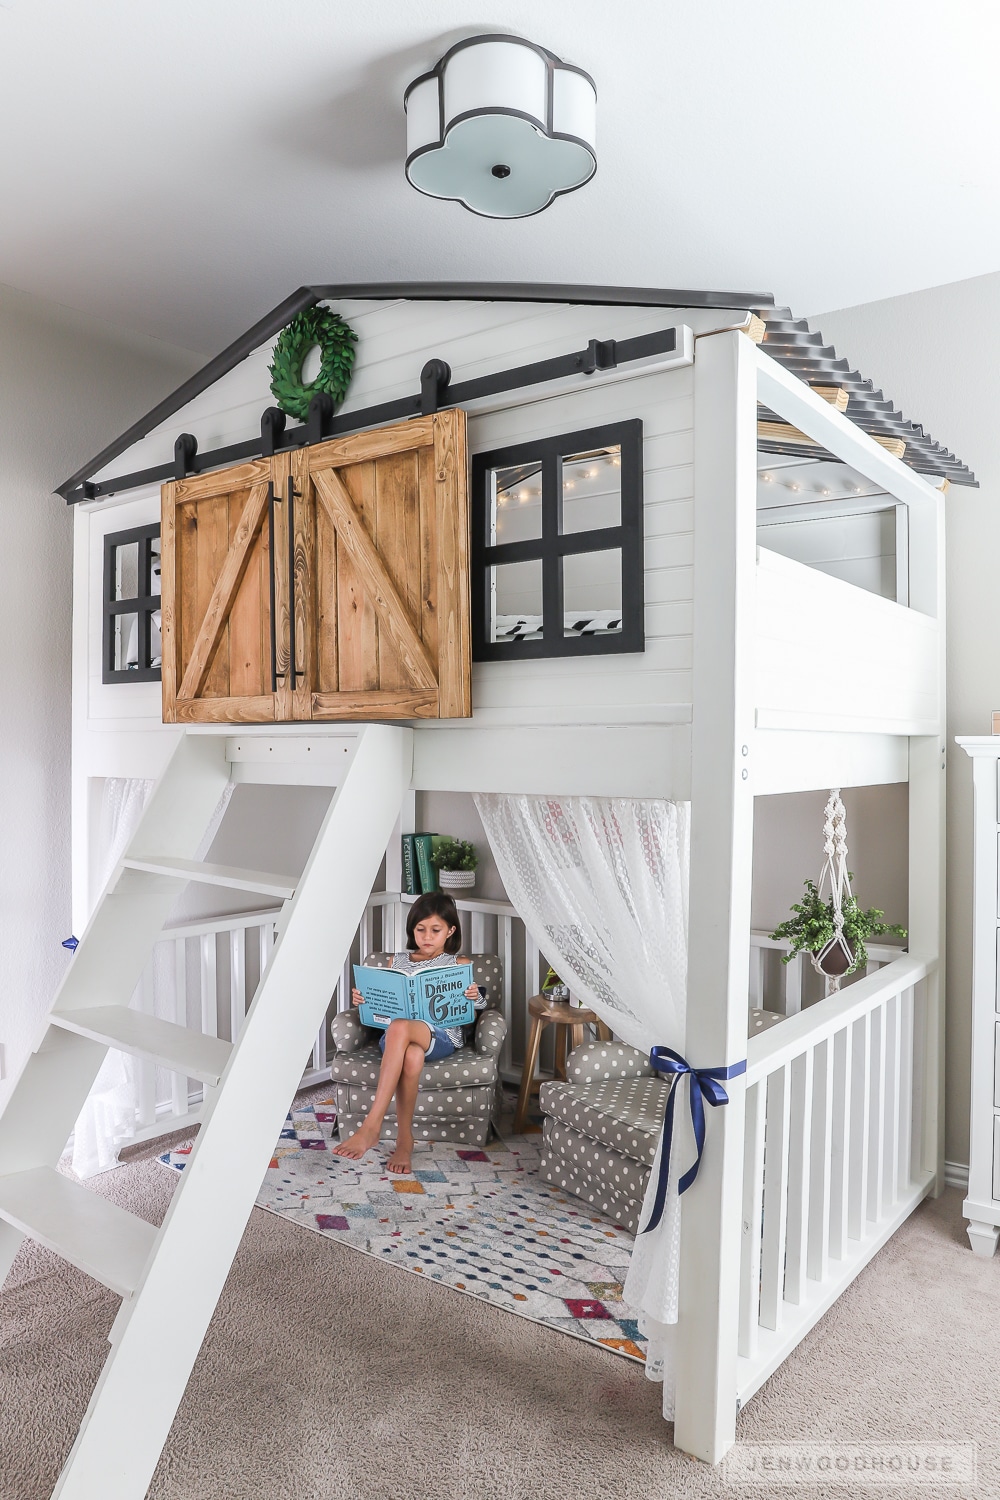 Build A Diy Sliding Barn Door Loft Bed, How To Build A Loft Bed With Stairs